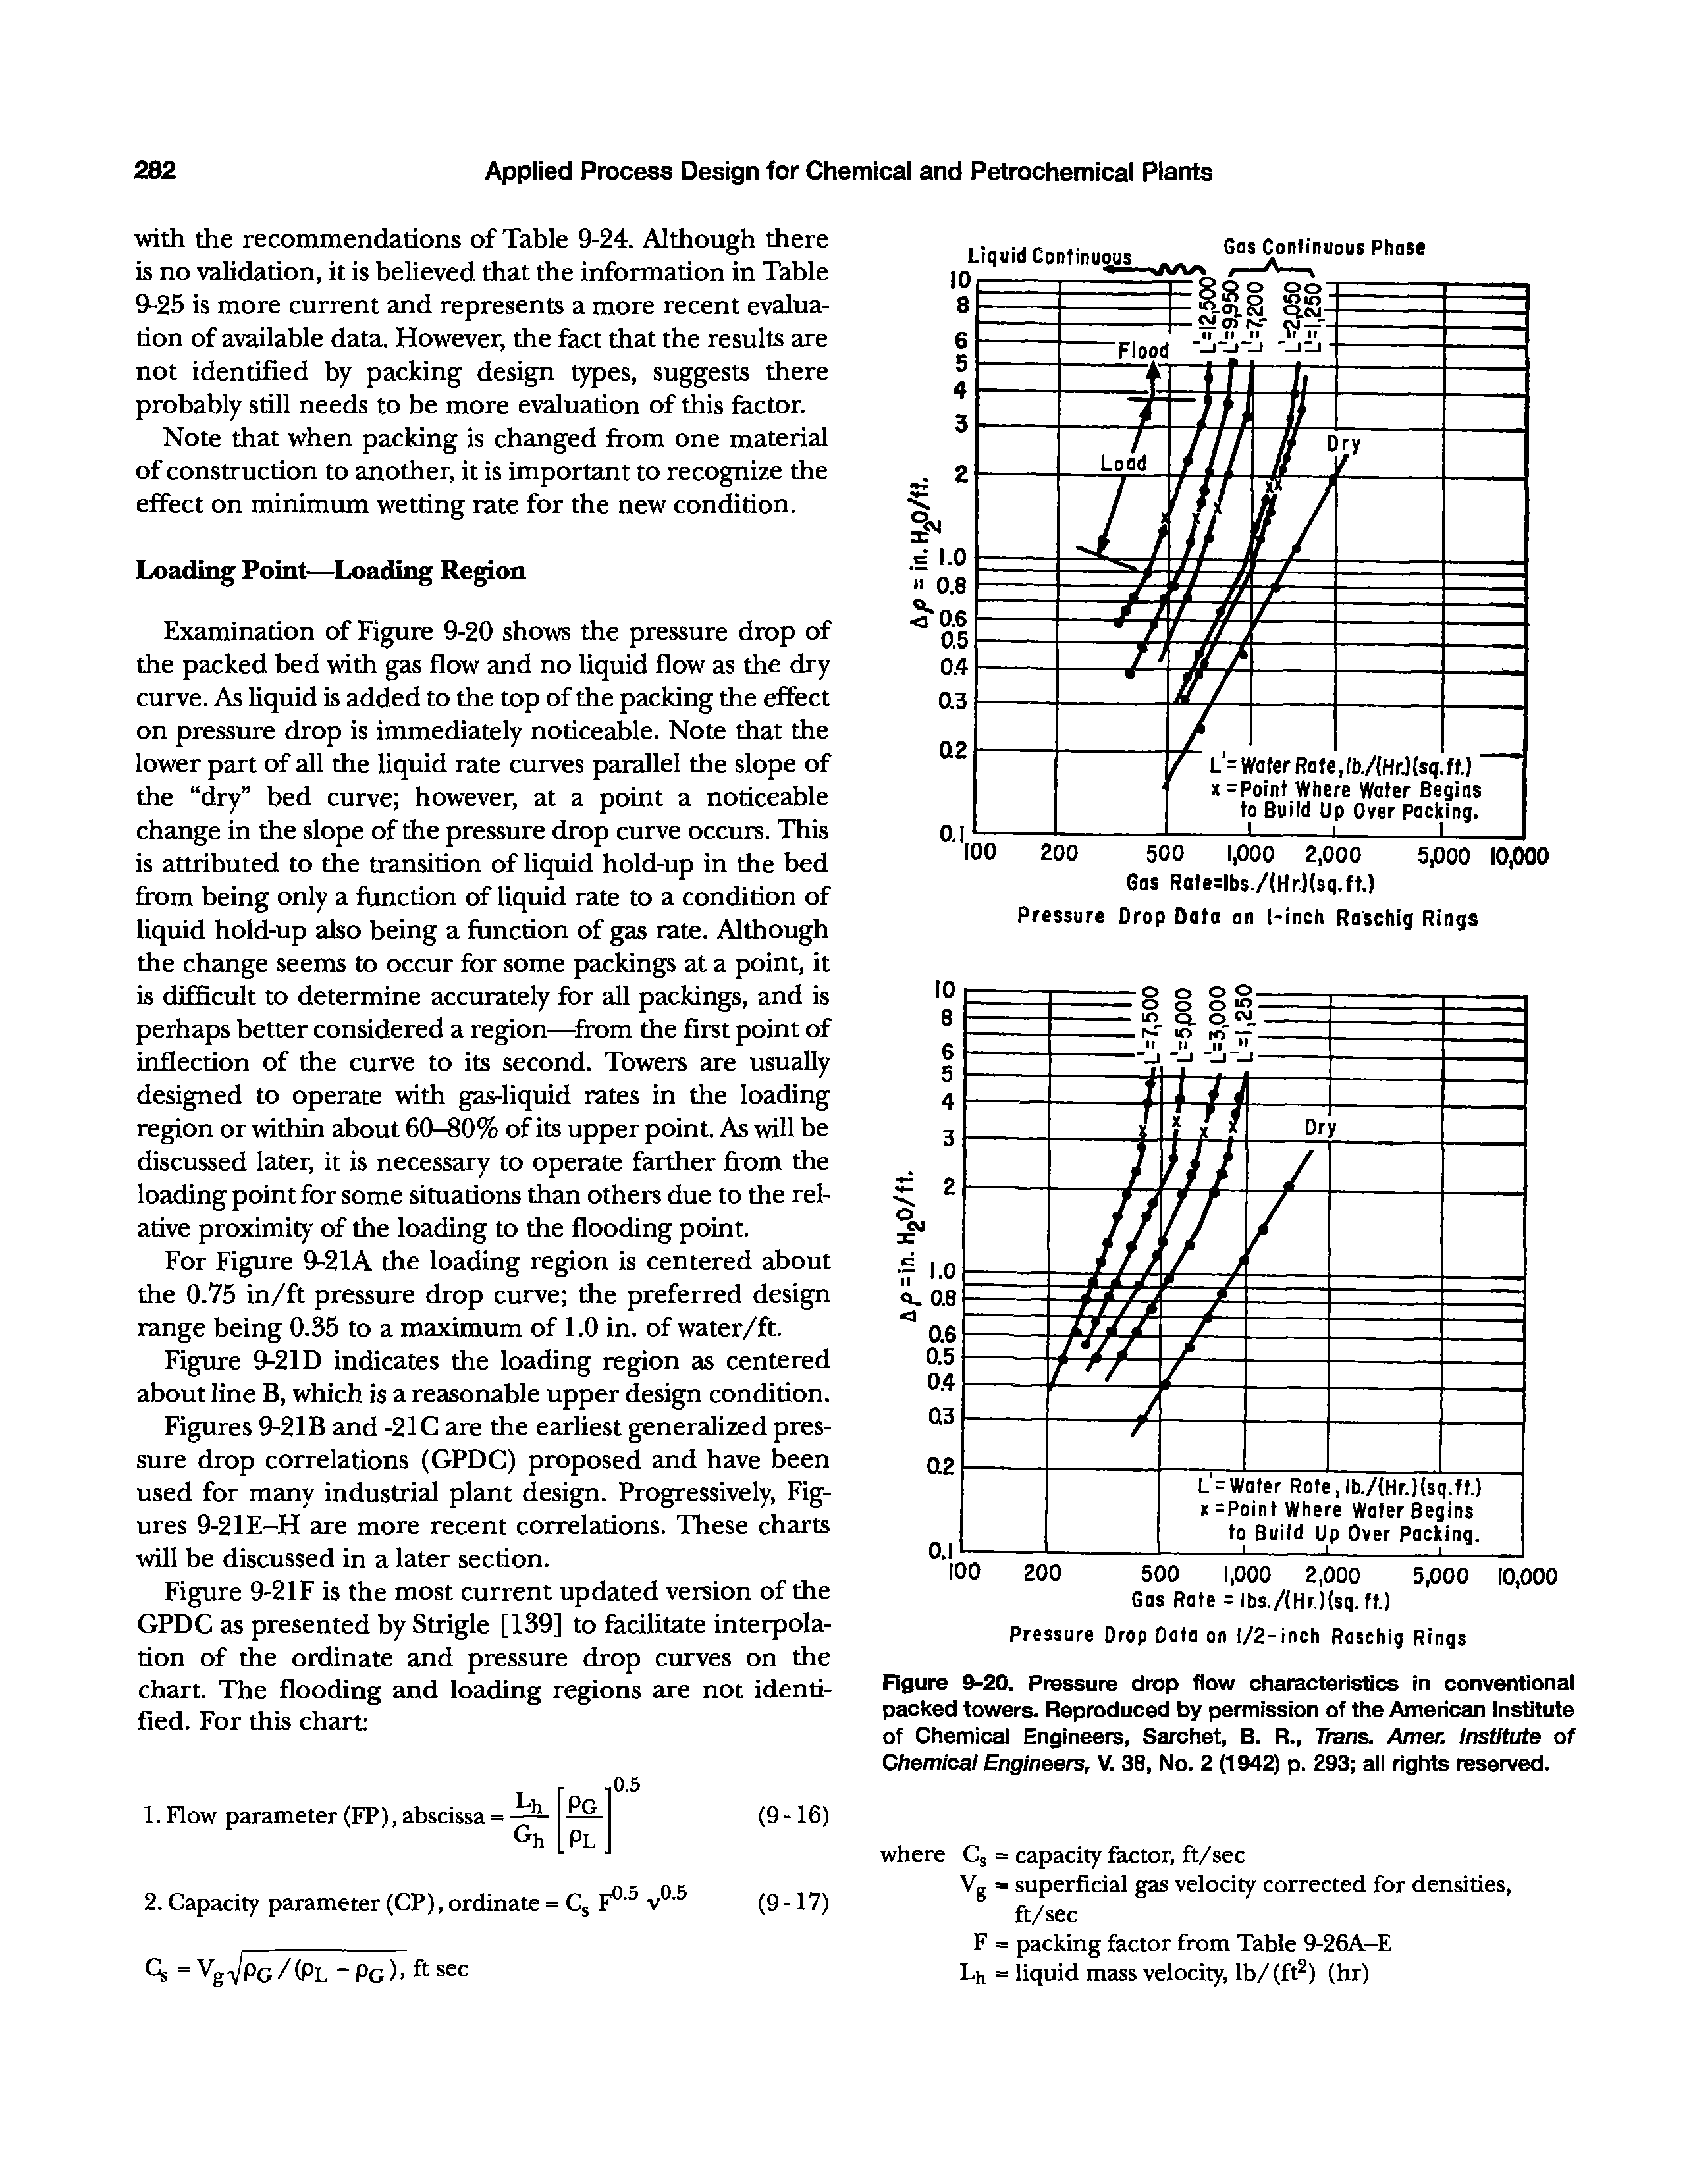 Figure 9-20. Pressure drop flow characteristics in conventional packed towers. Reproduced by permission of the Americem Institute of Chemical Engineers, Sarchet, B. R., Trans. Amen Institute of Chemical Engineers, V. 38, No. 2 (1942) p. 293 all rights reserved.